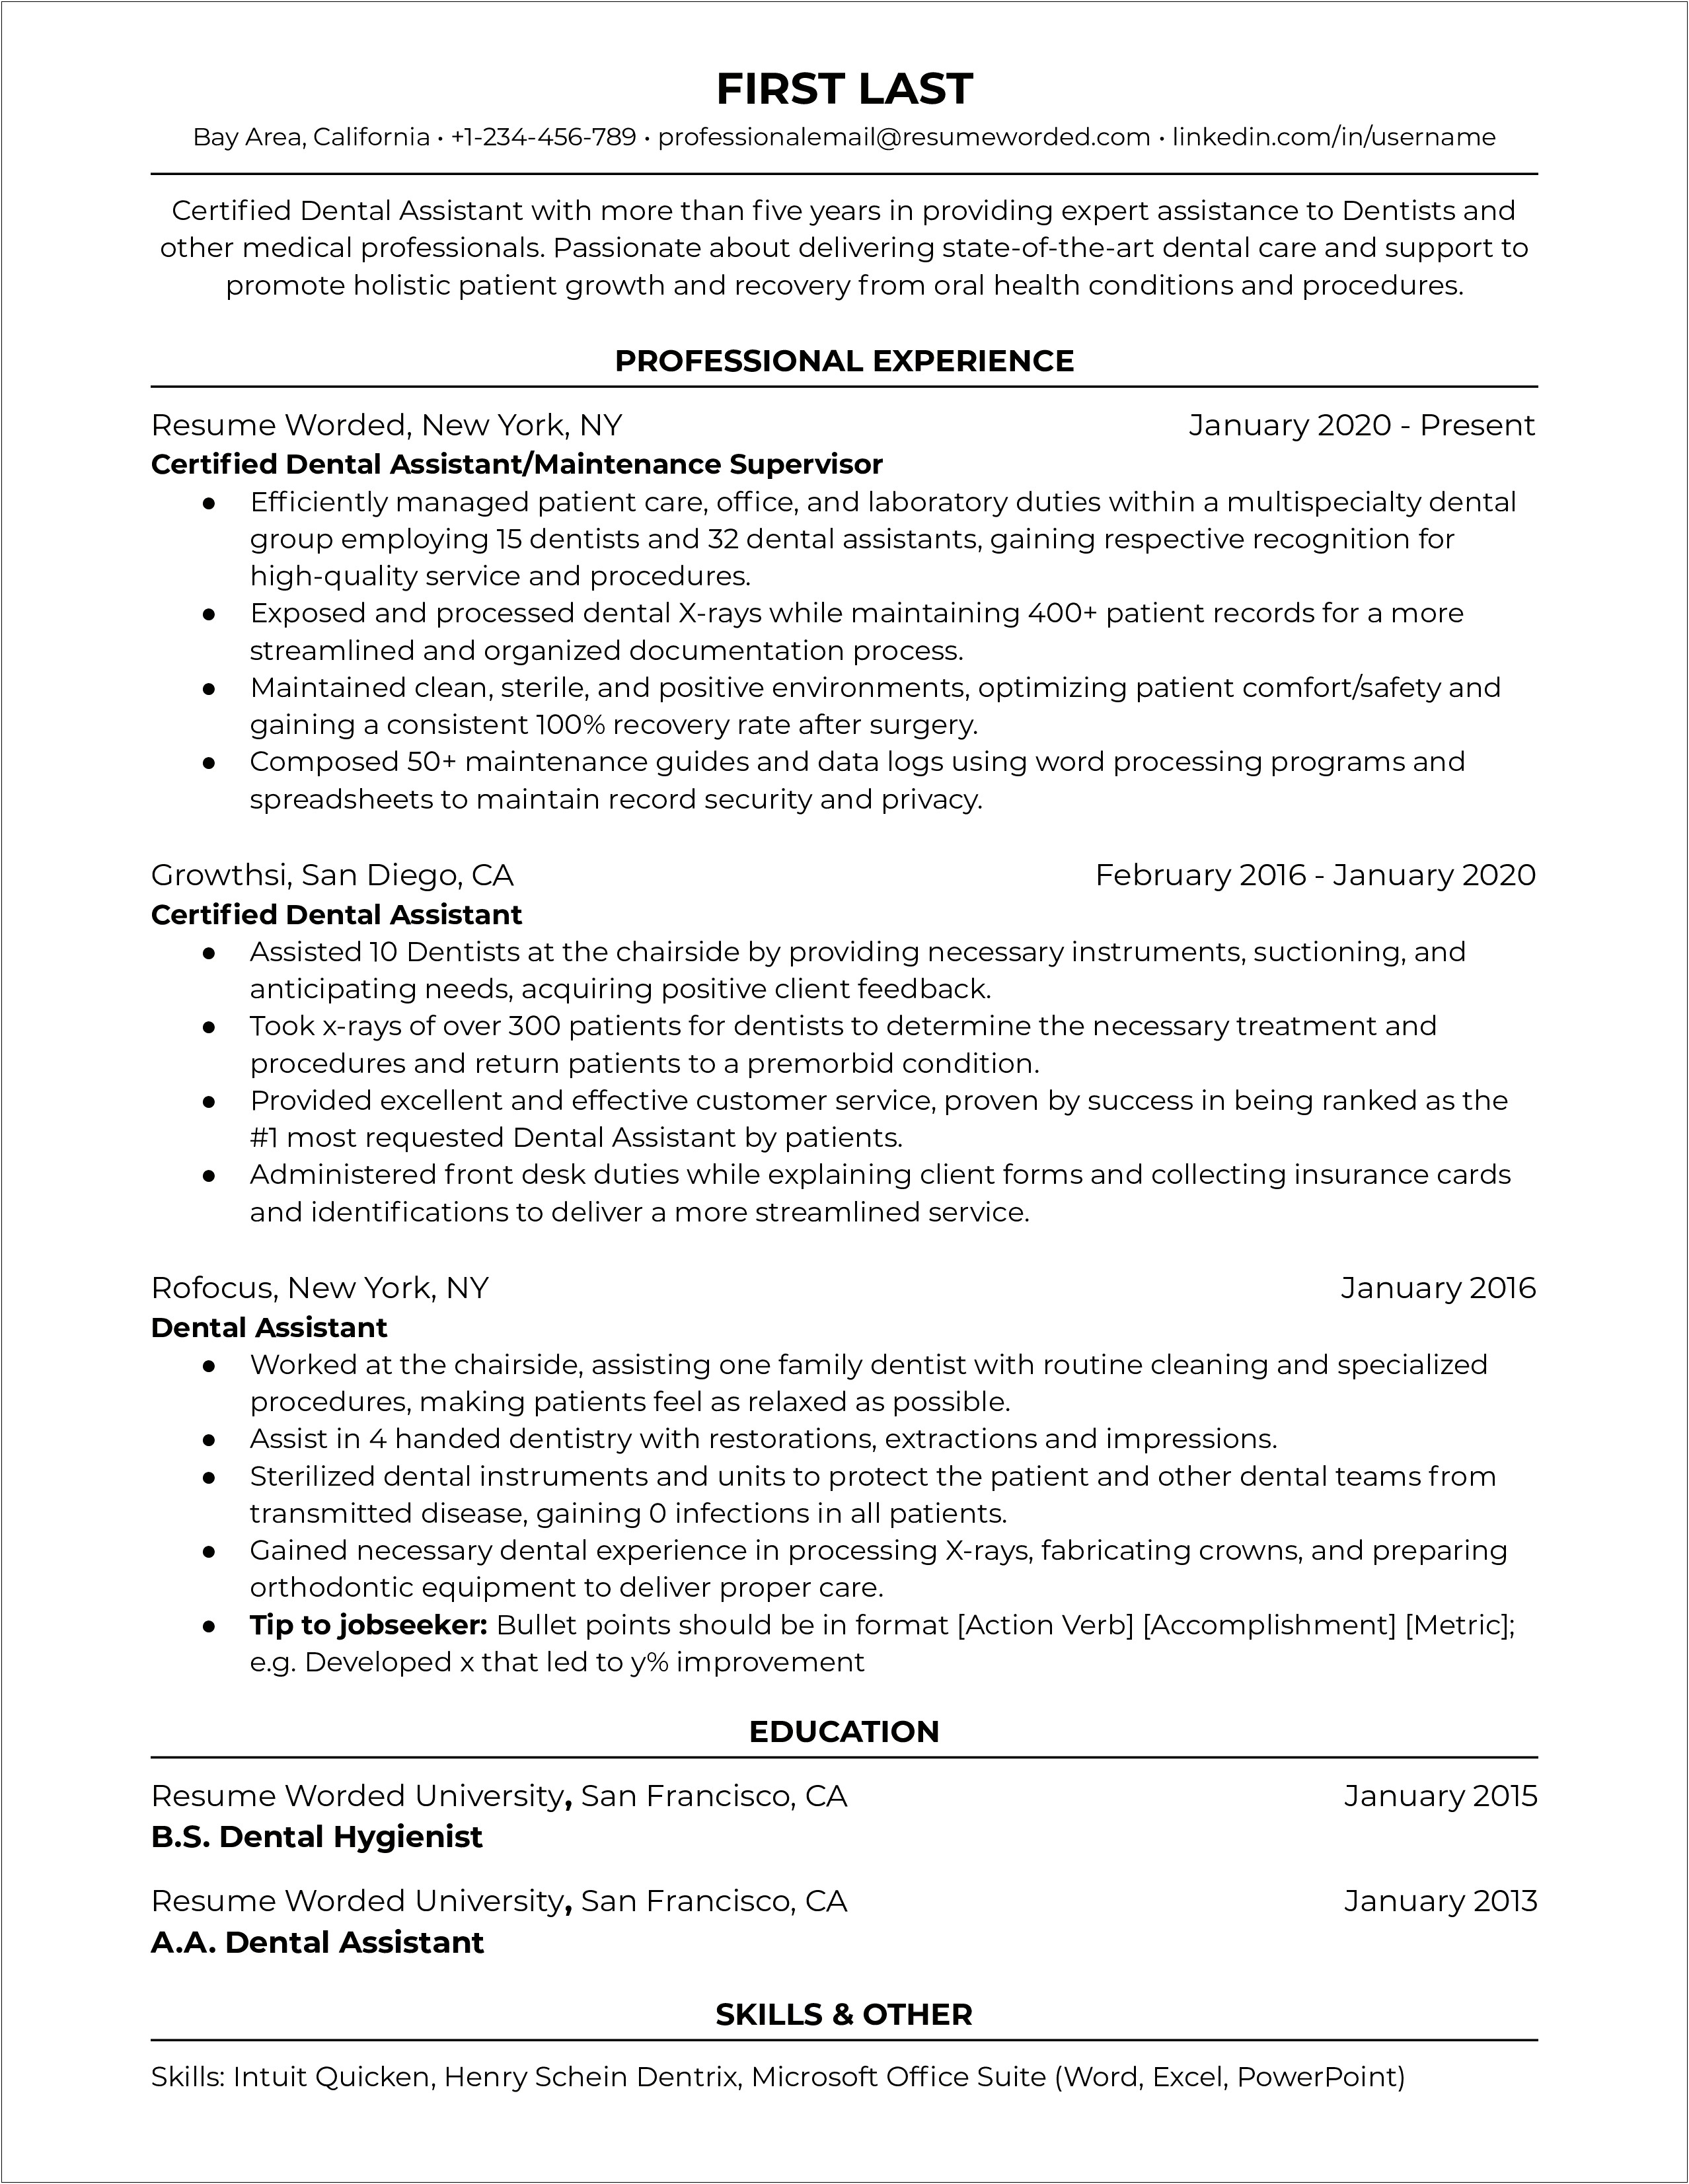 Examples Of Education Assistant Resumes